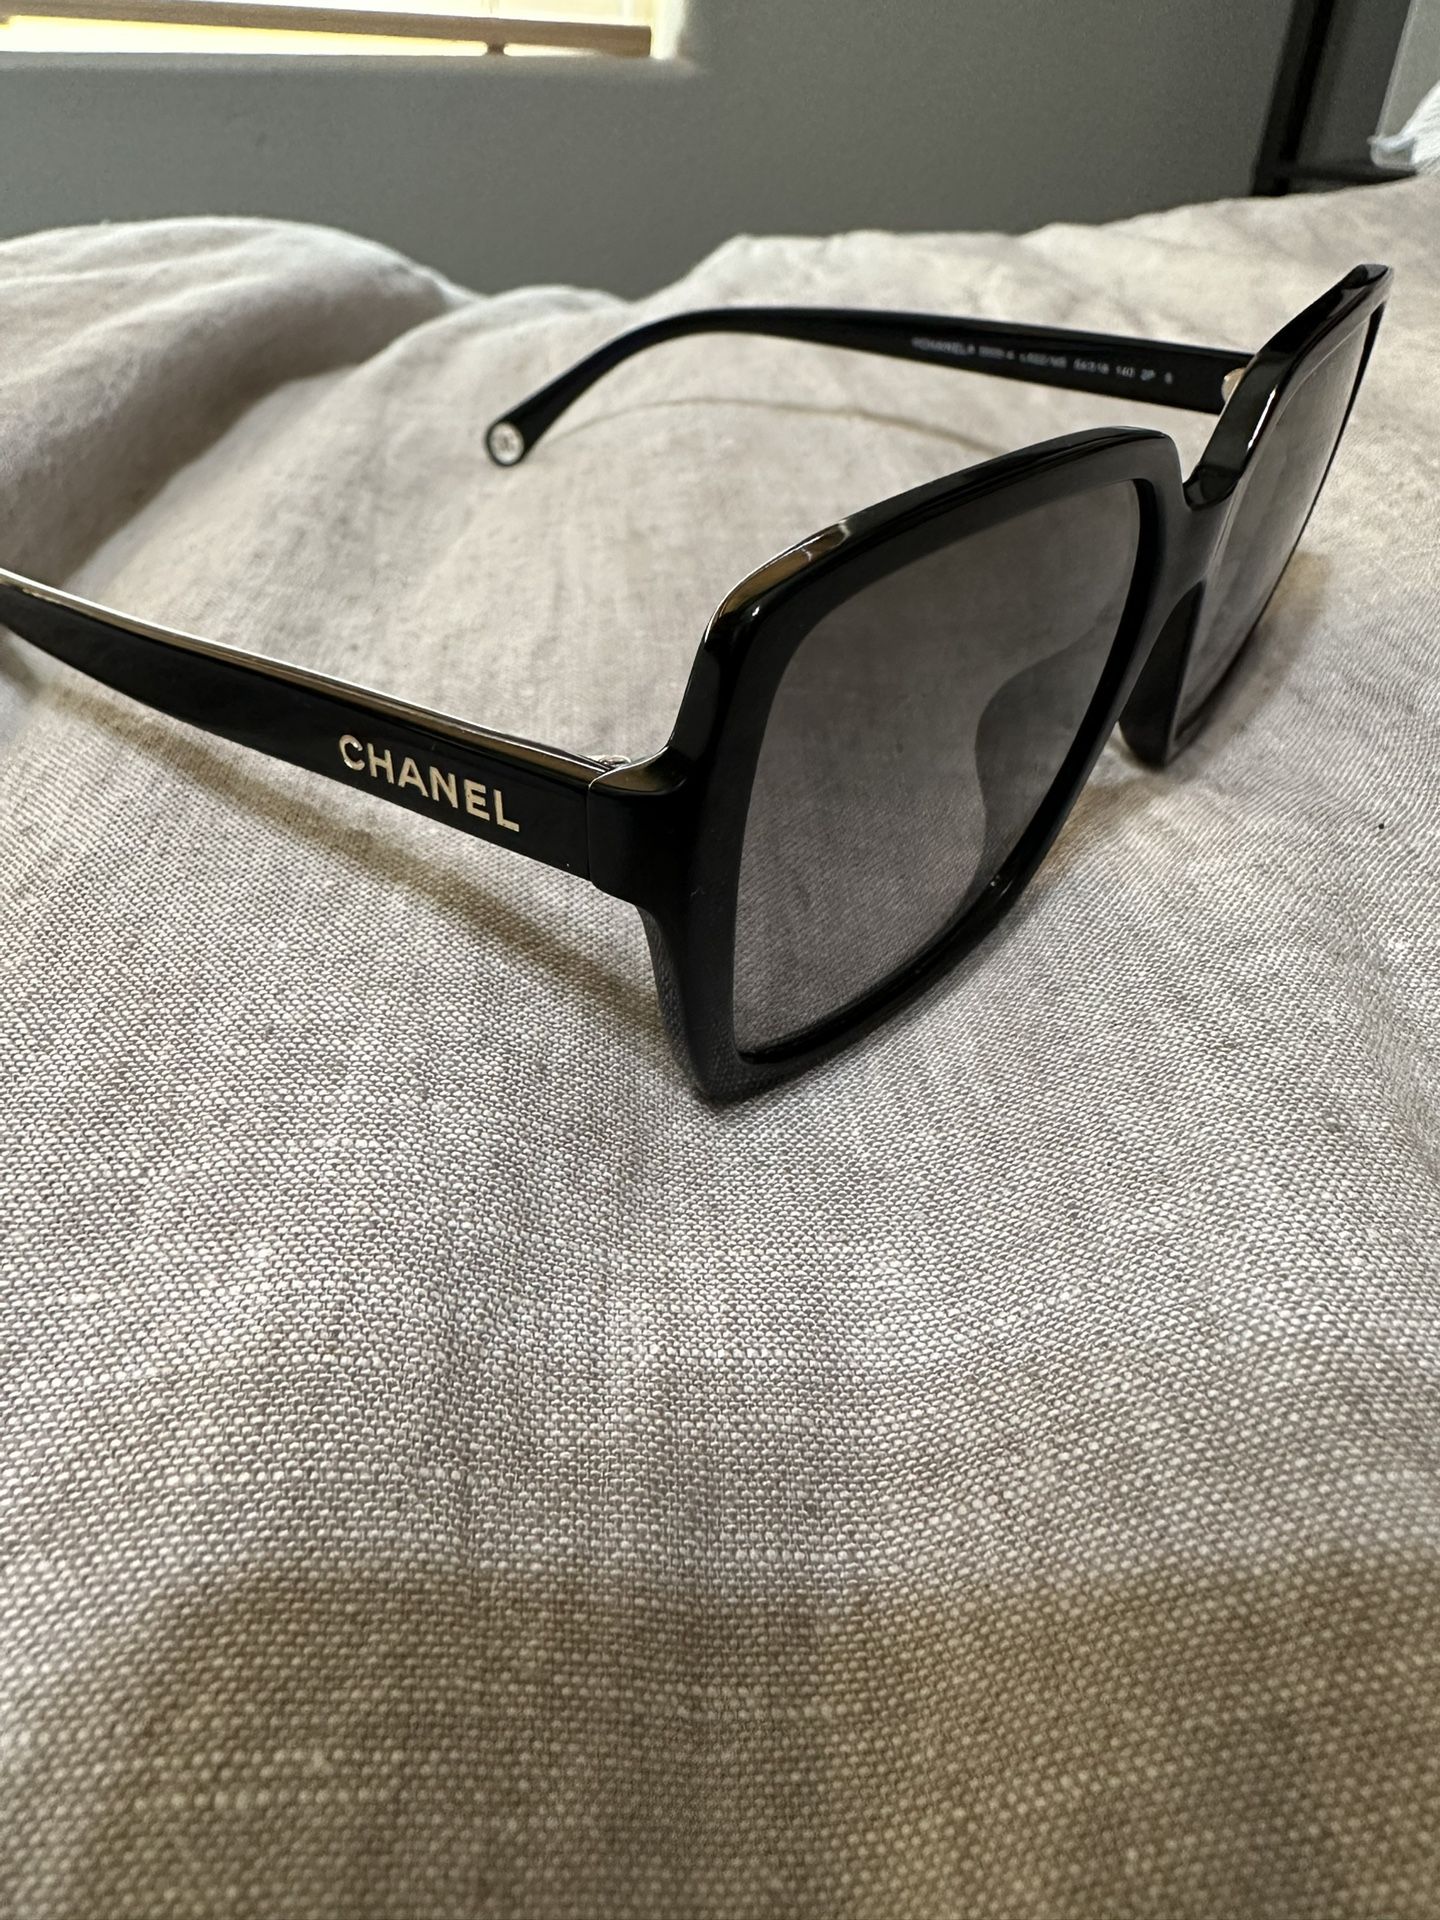 New Chanel Model 5505-A Square Frame Polarized Women’s Sunglasses Never  Worn for Sale in Menifee, CA - OfferUp